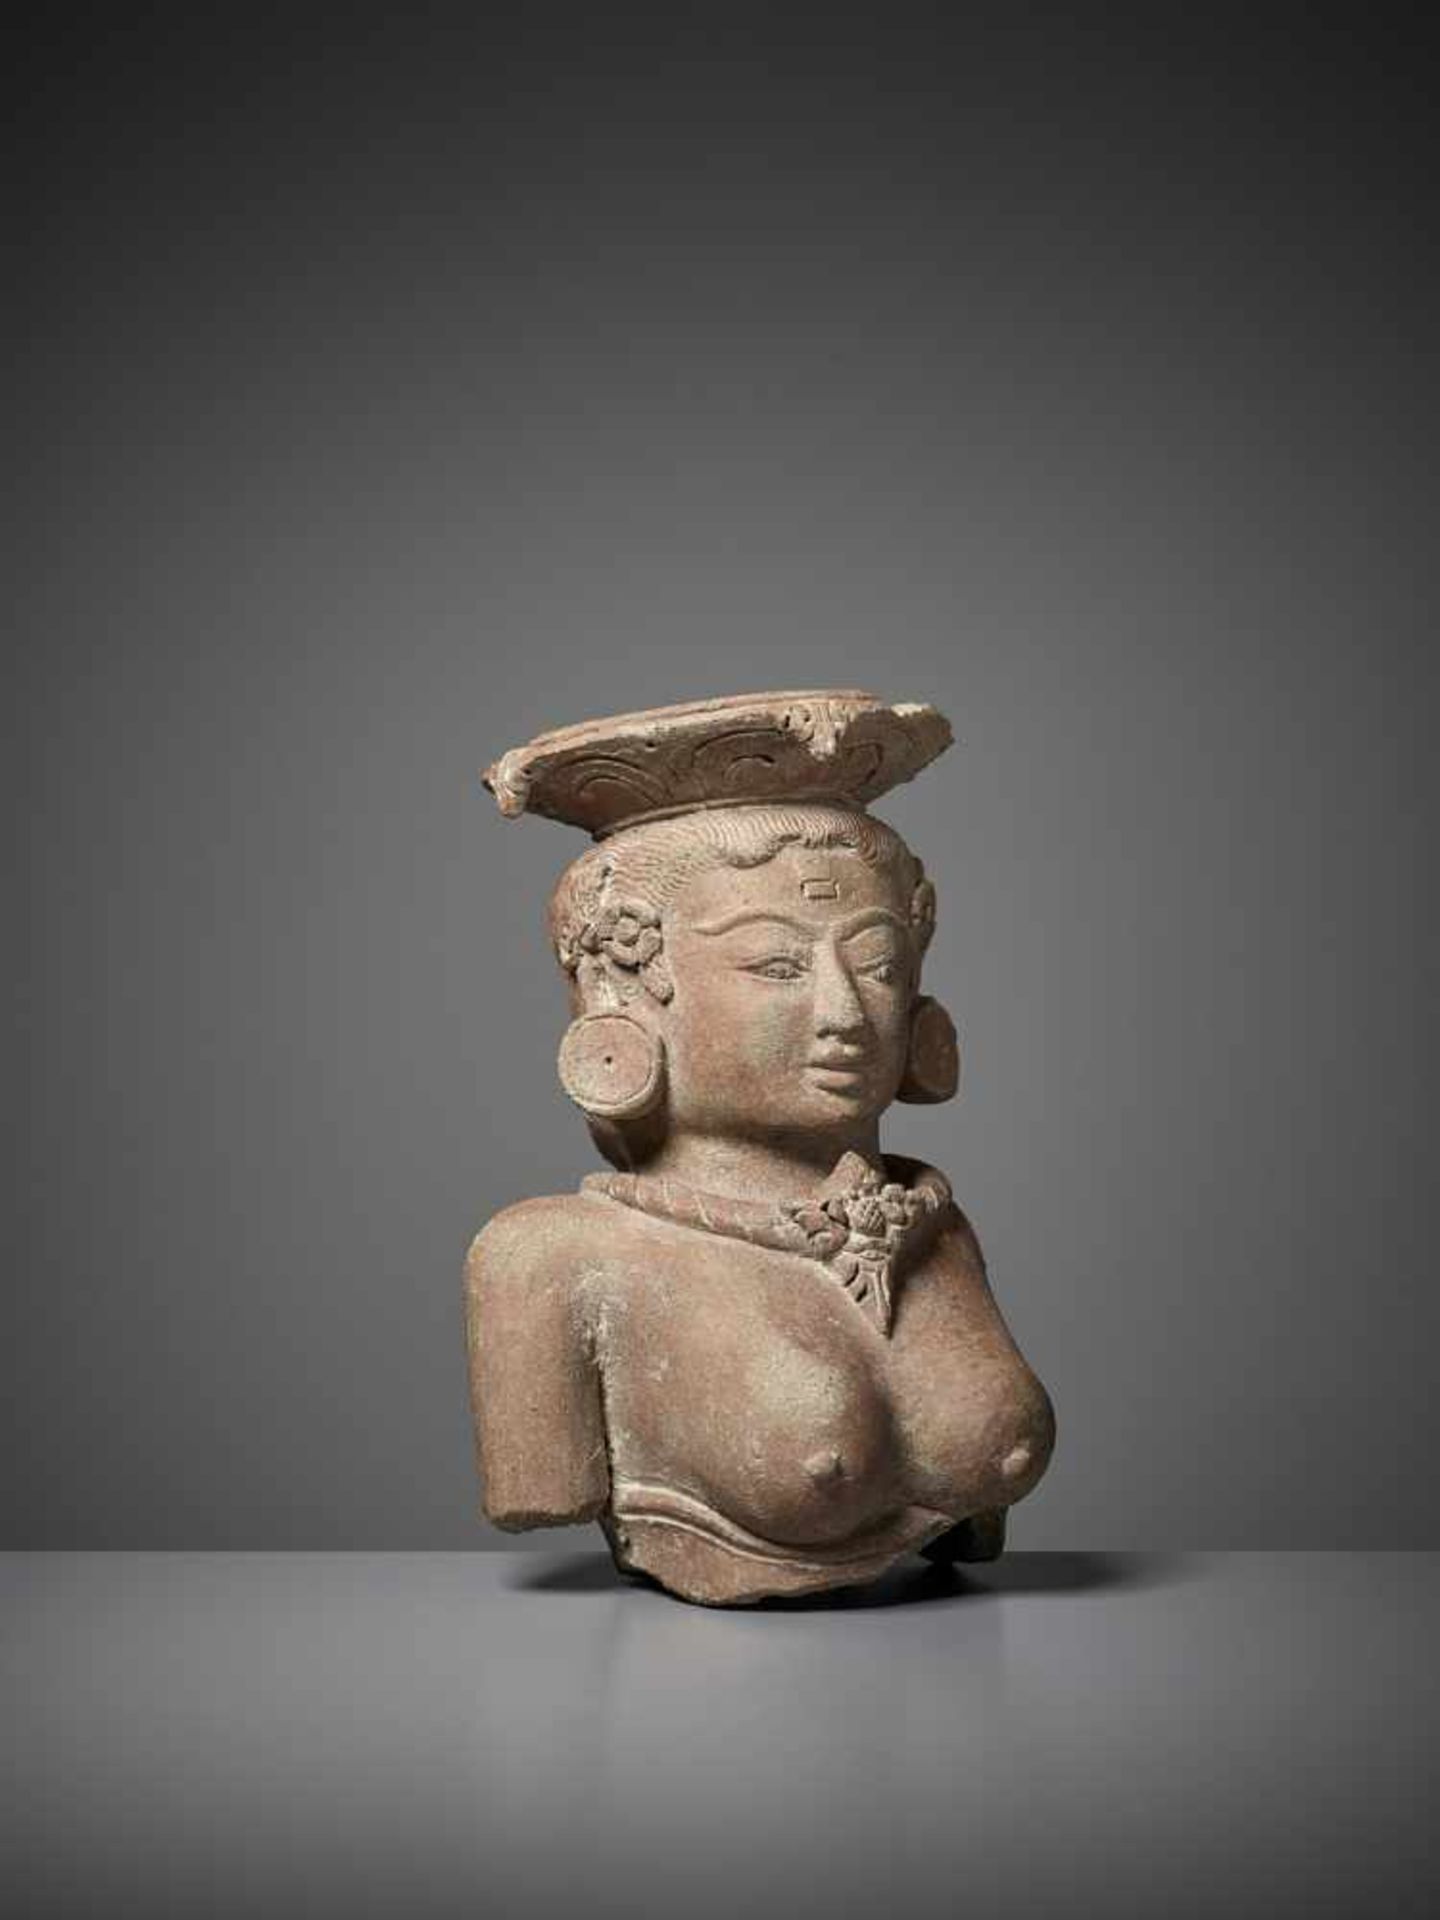 A FEMALE MAJAPAHIT TERRACOTTA BUST Indonesia, Java, 14th – 15th century. This elaborate and - Image 8 of 10